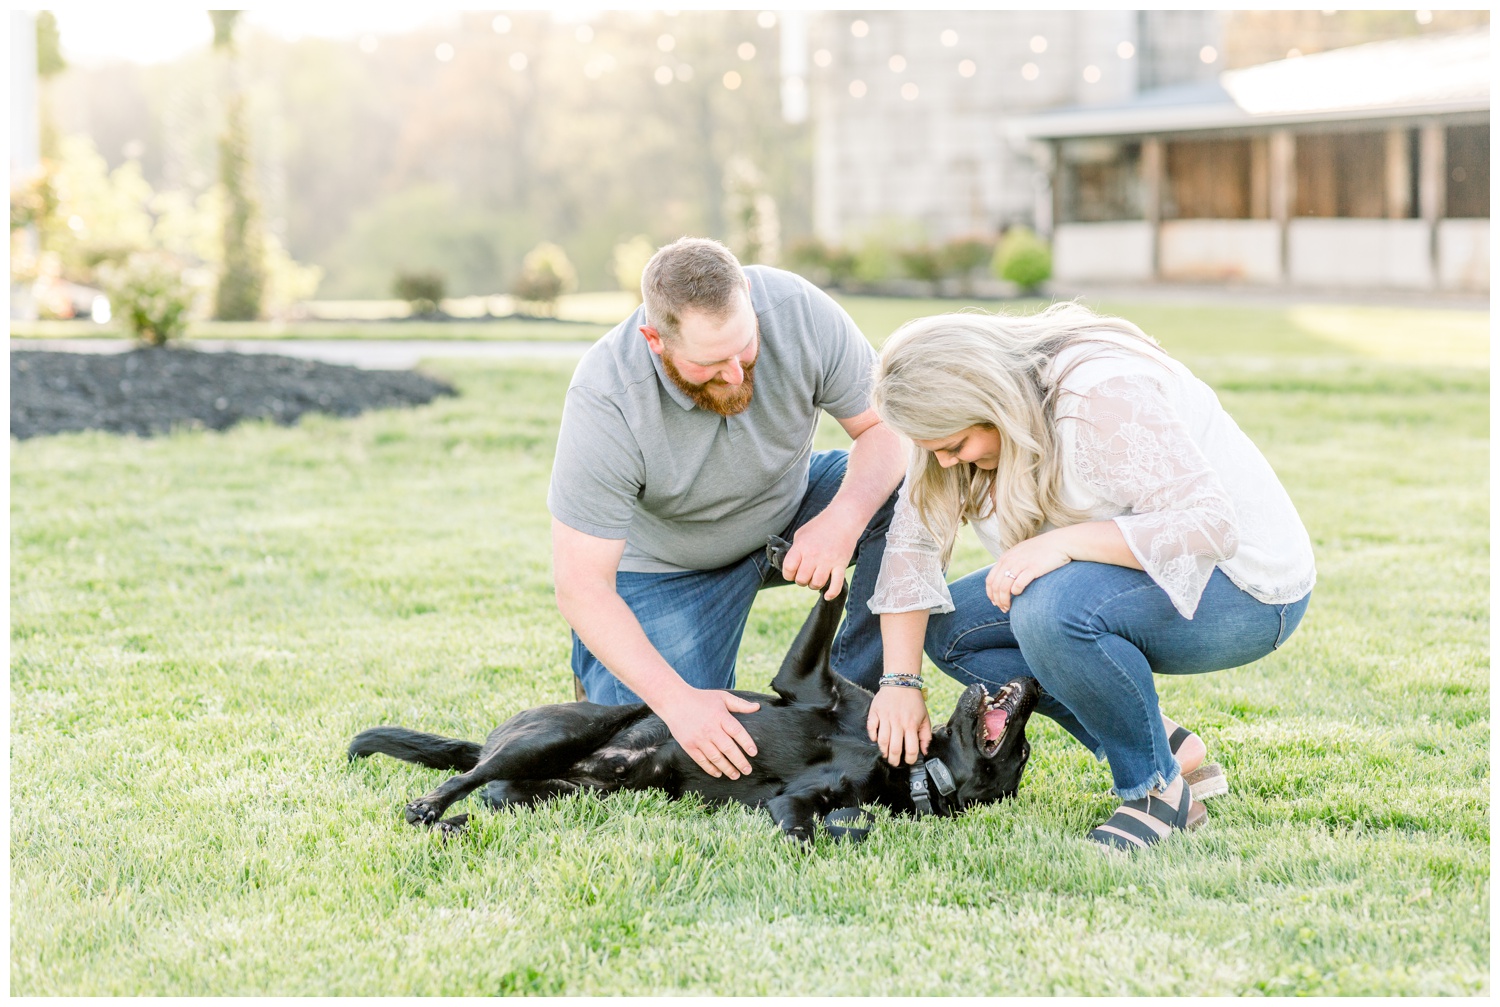 Engagement Pictures with Dog - Dog Belly Rub - Misty Maple Gardens